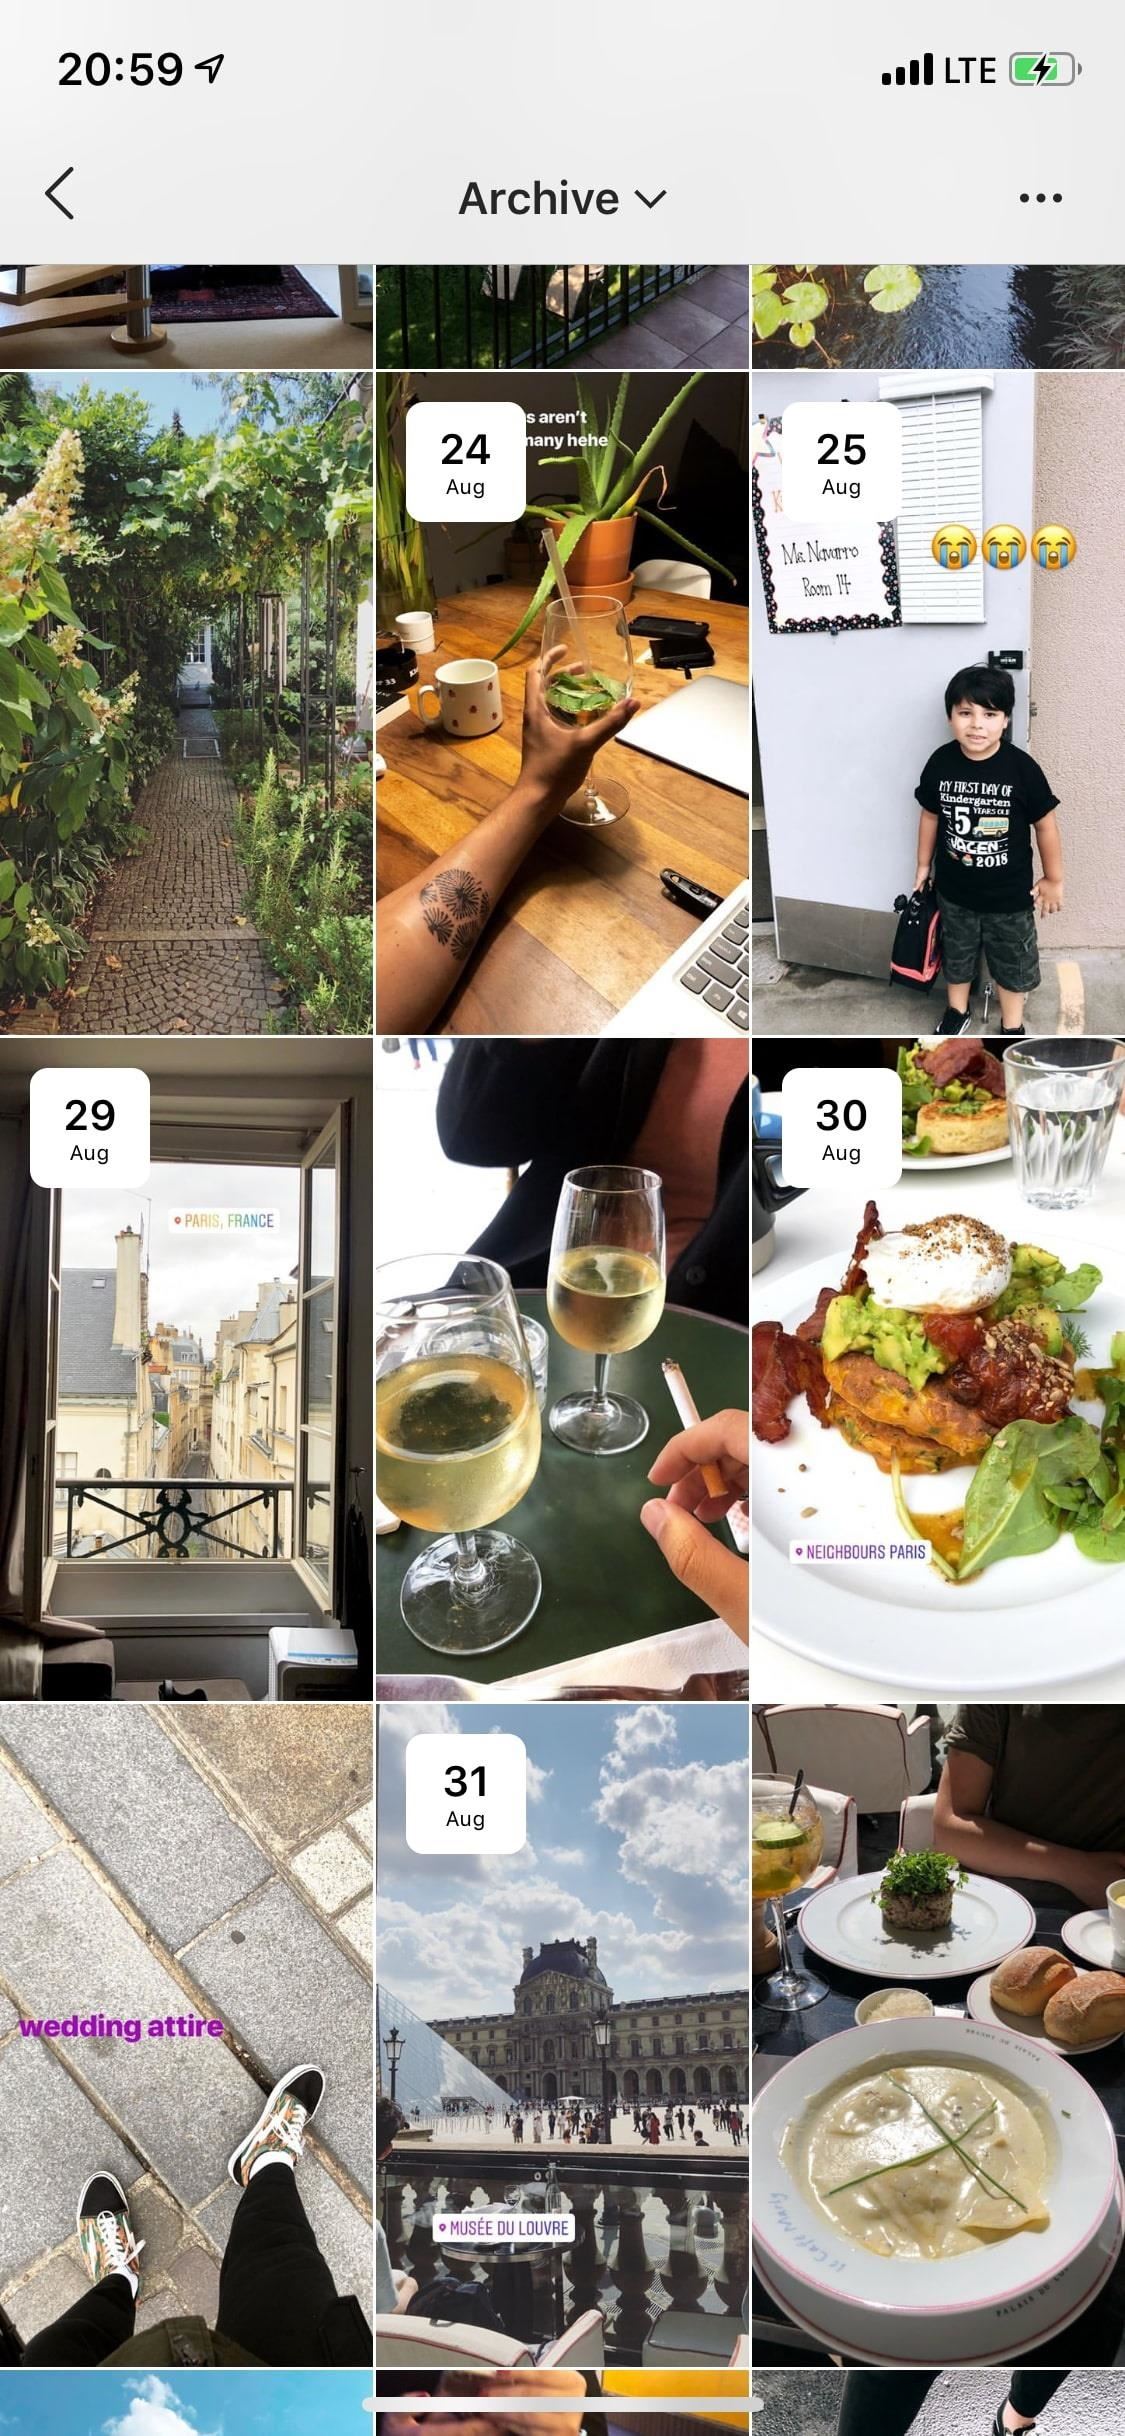 15 Hidden Instagram Features You Don't Want to Miss